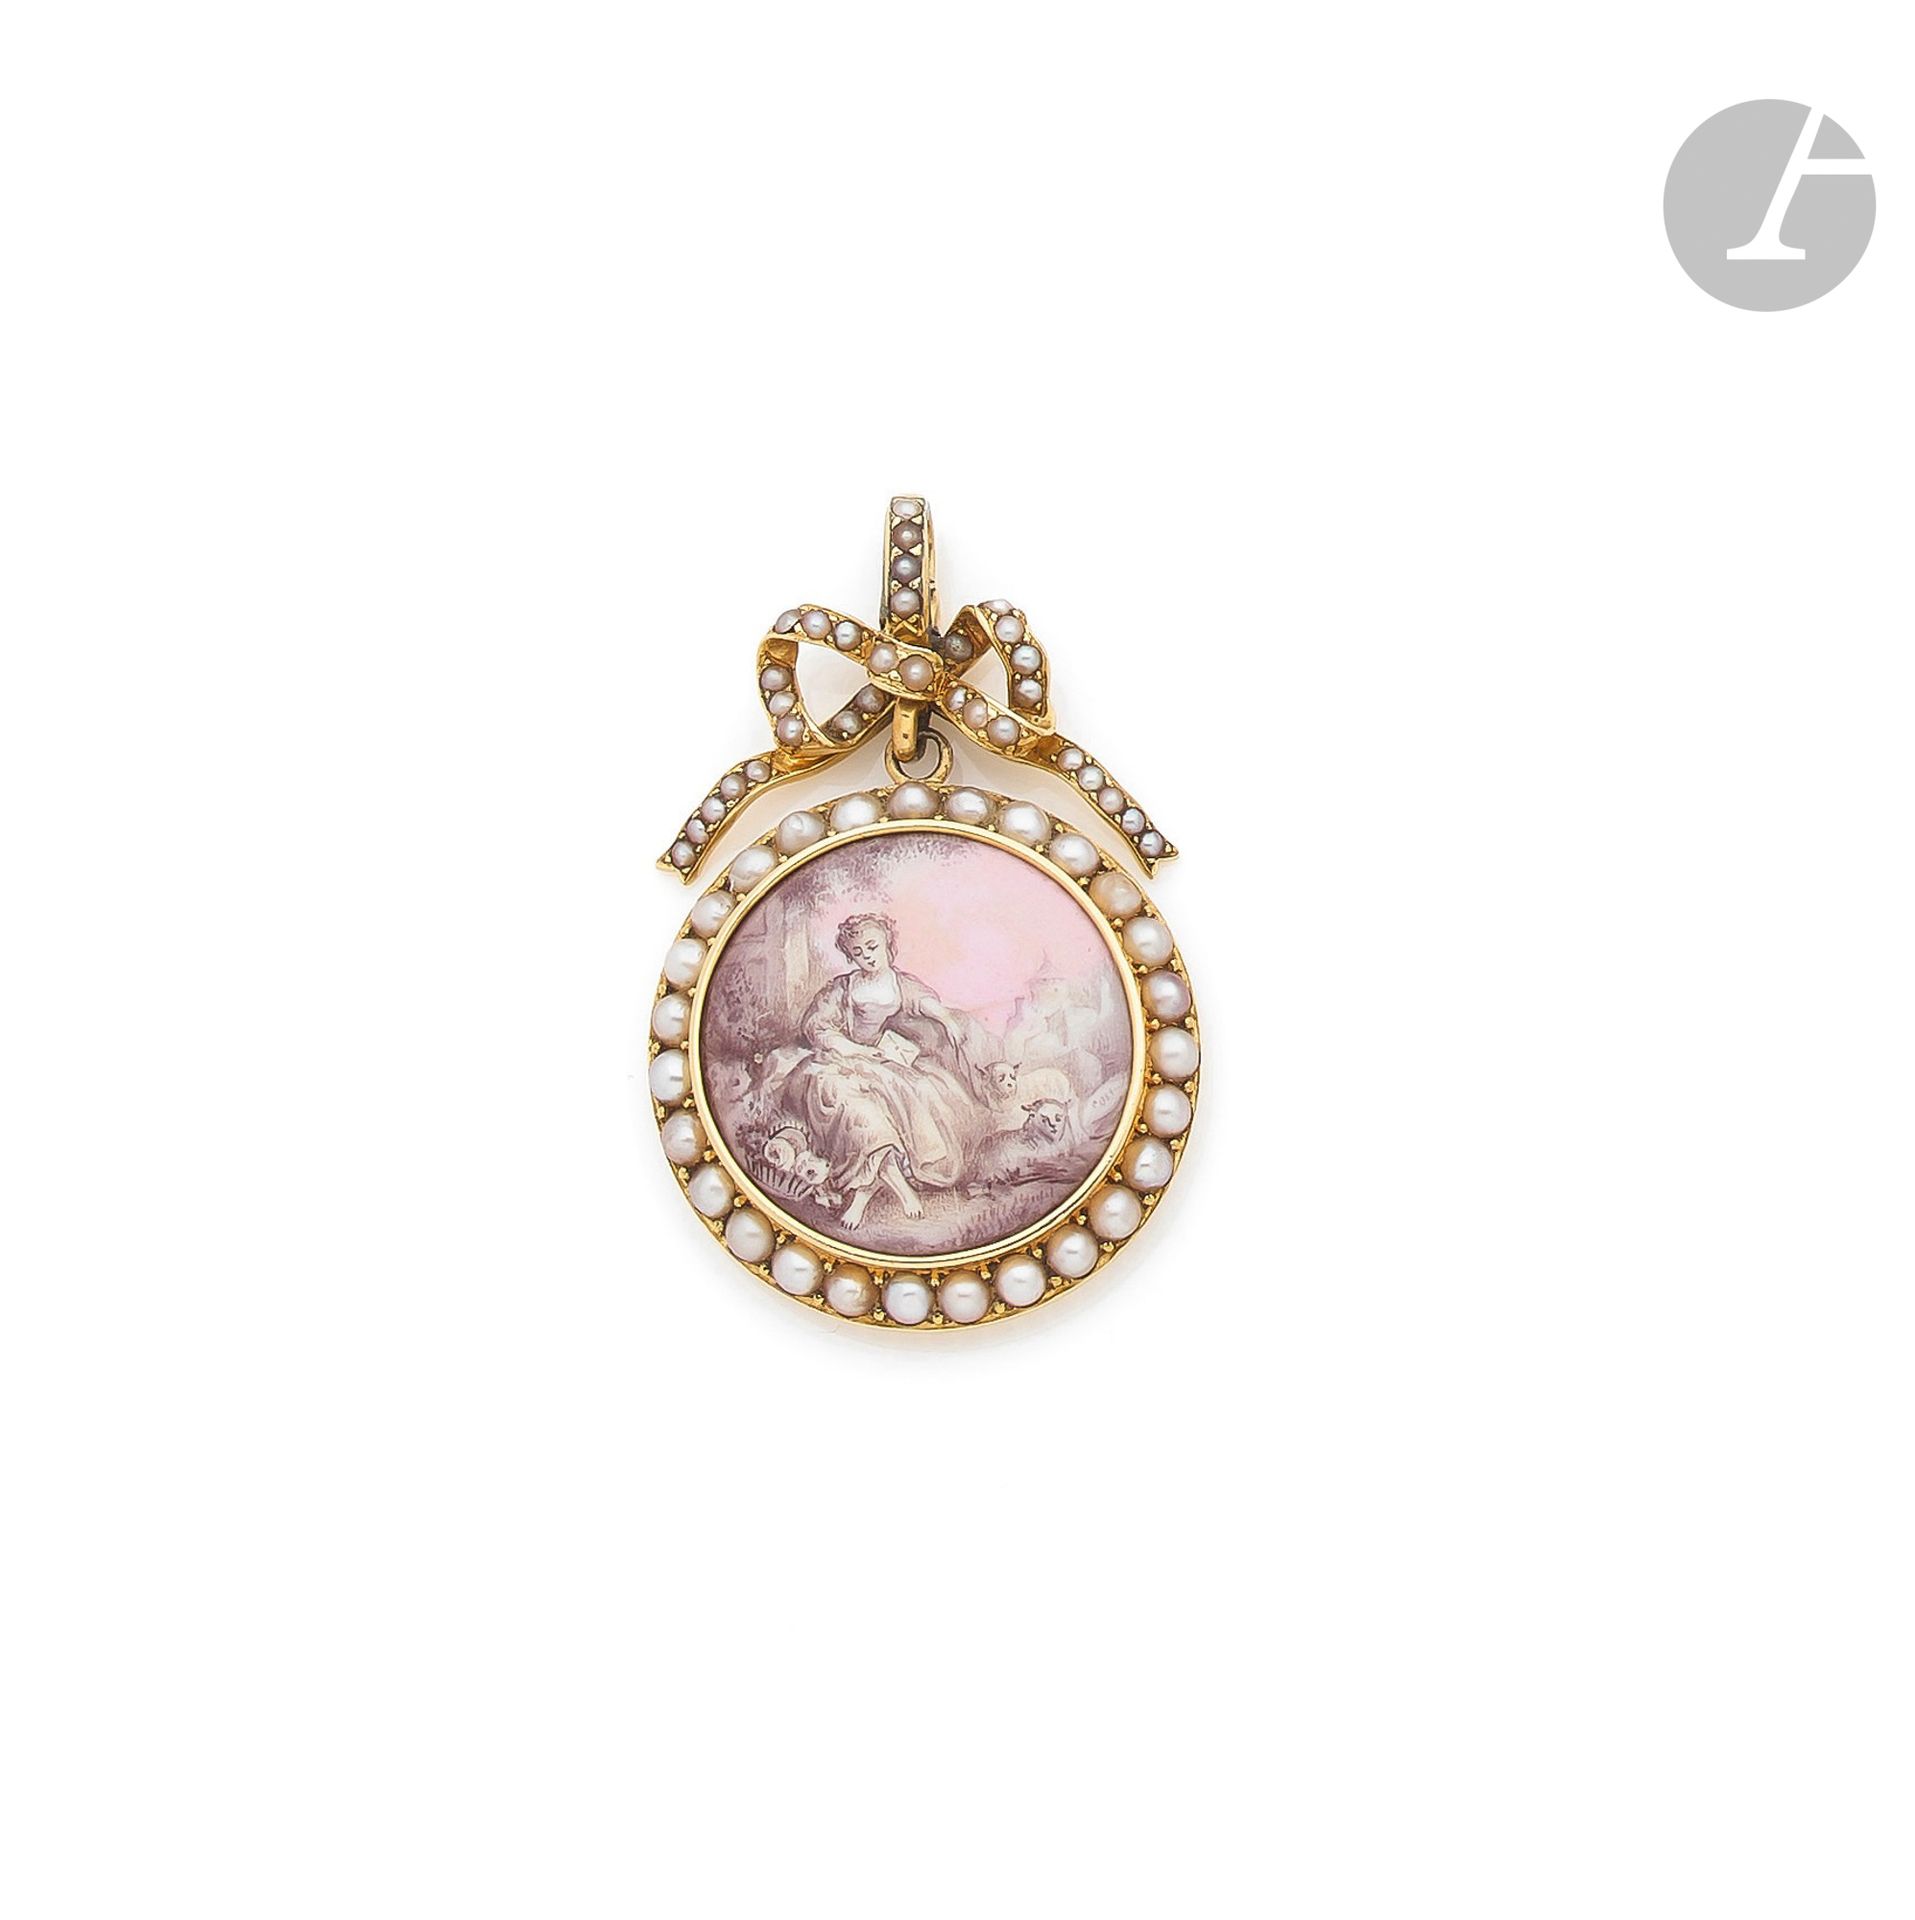 Null Pendant in 18K (750) gold, decorated with a miniature in grisaille represen&hellip;